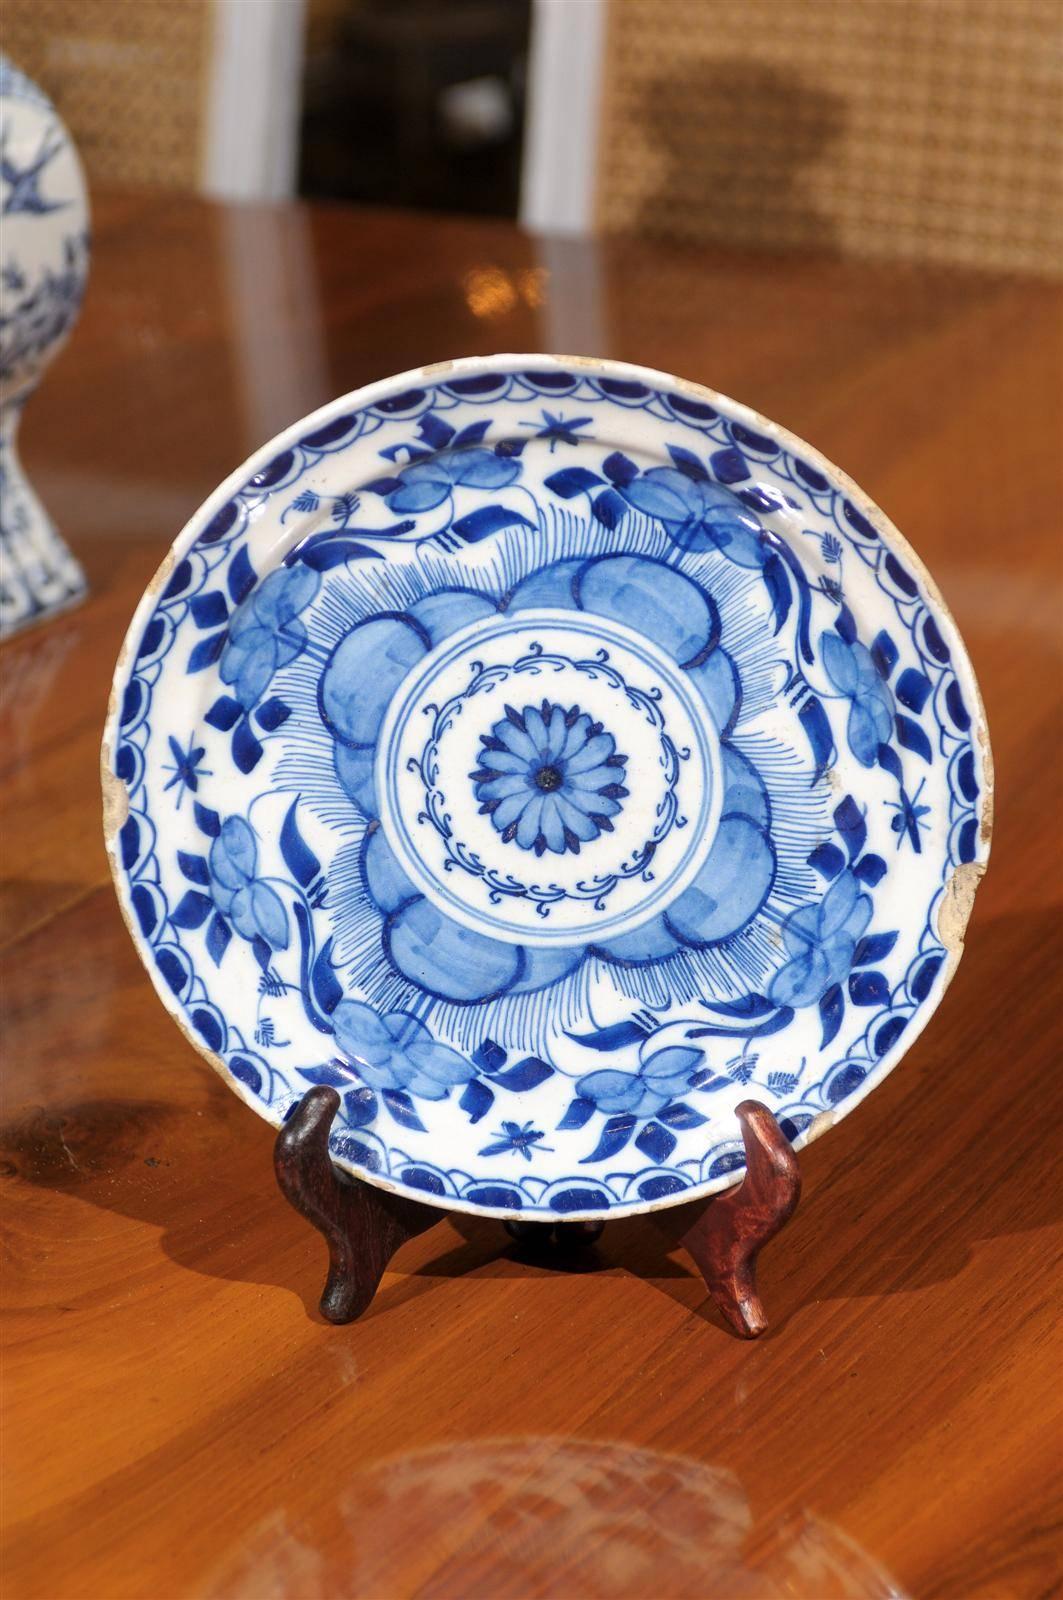 18th century blue Delft plate, circa 1750.
A mid-18th century Delft blue and white plate, with an unusual pattern with an overall flower theme.